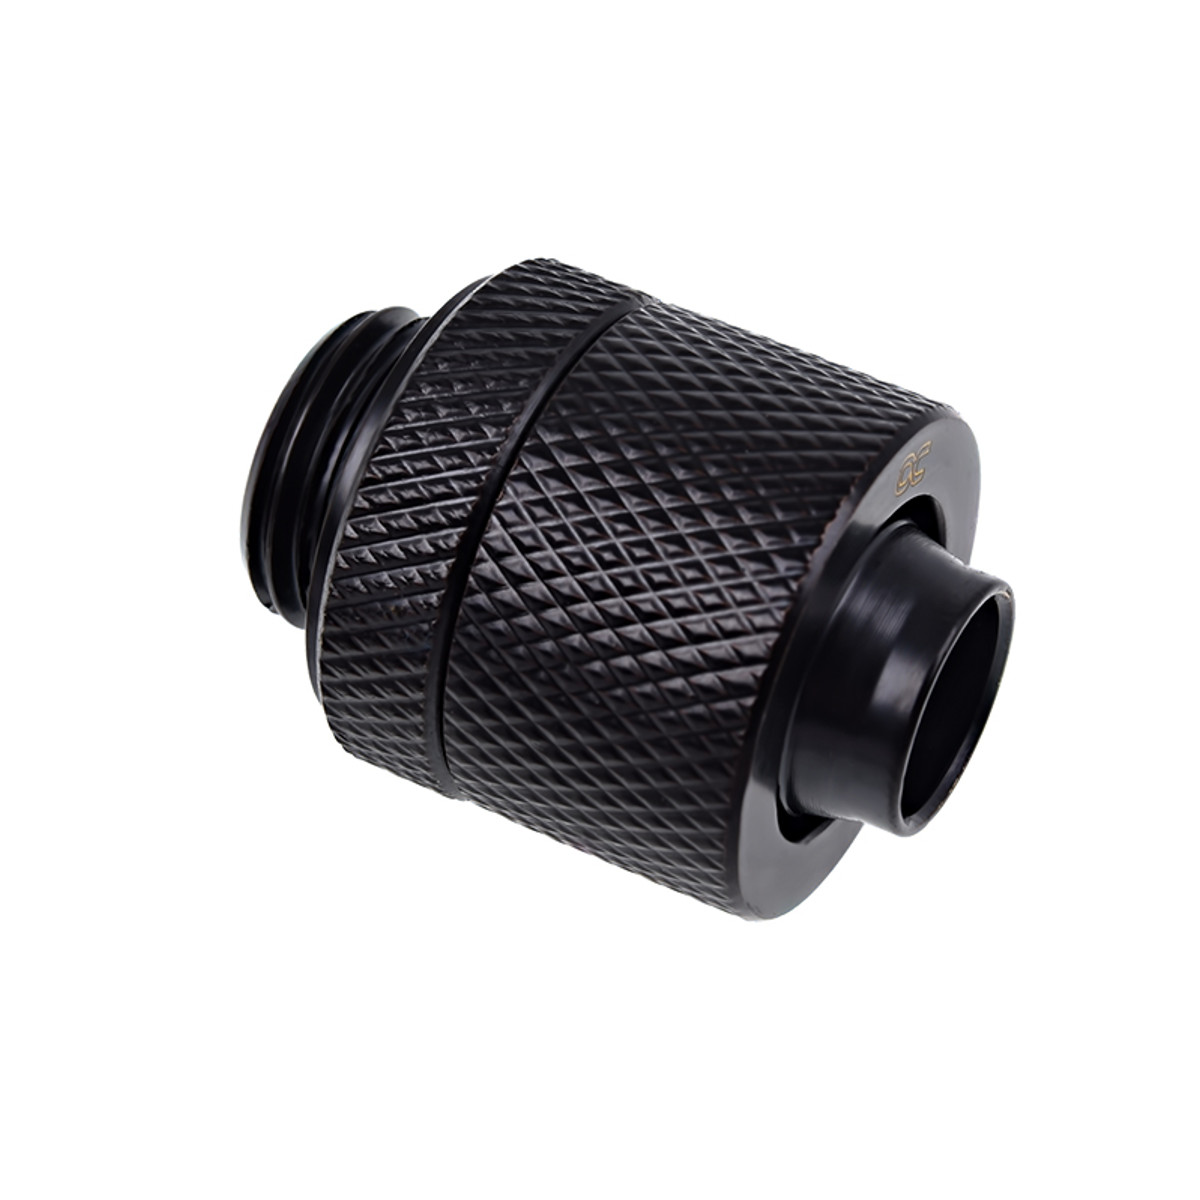 Alphacool - Alphacool Eiszapfen 13/10mm Deep Black Compression Fitting - Six Pack